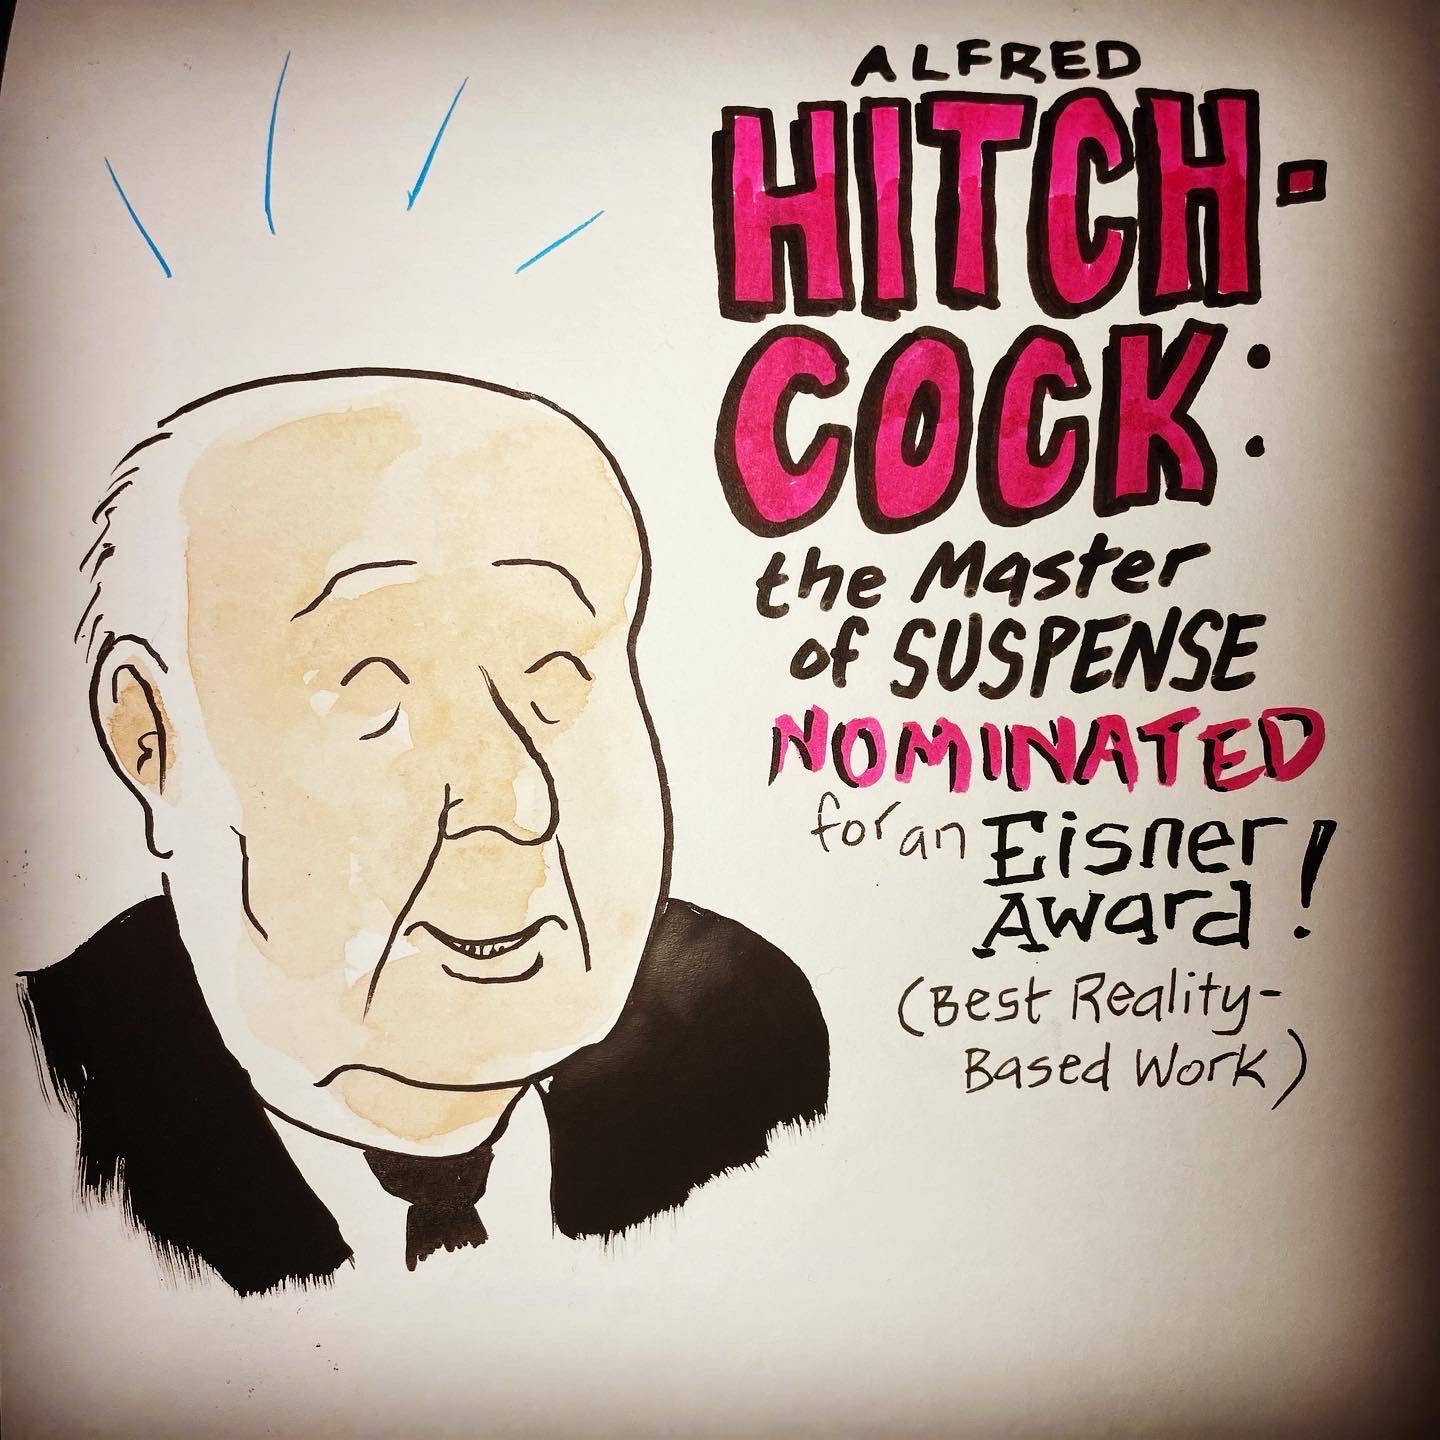 ALFRED HITCHCOCK: The Master of Suspense nominated for an Eisner Award!